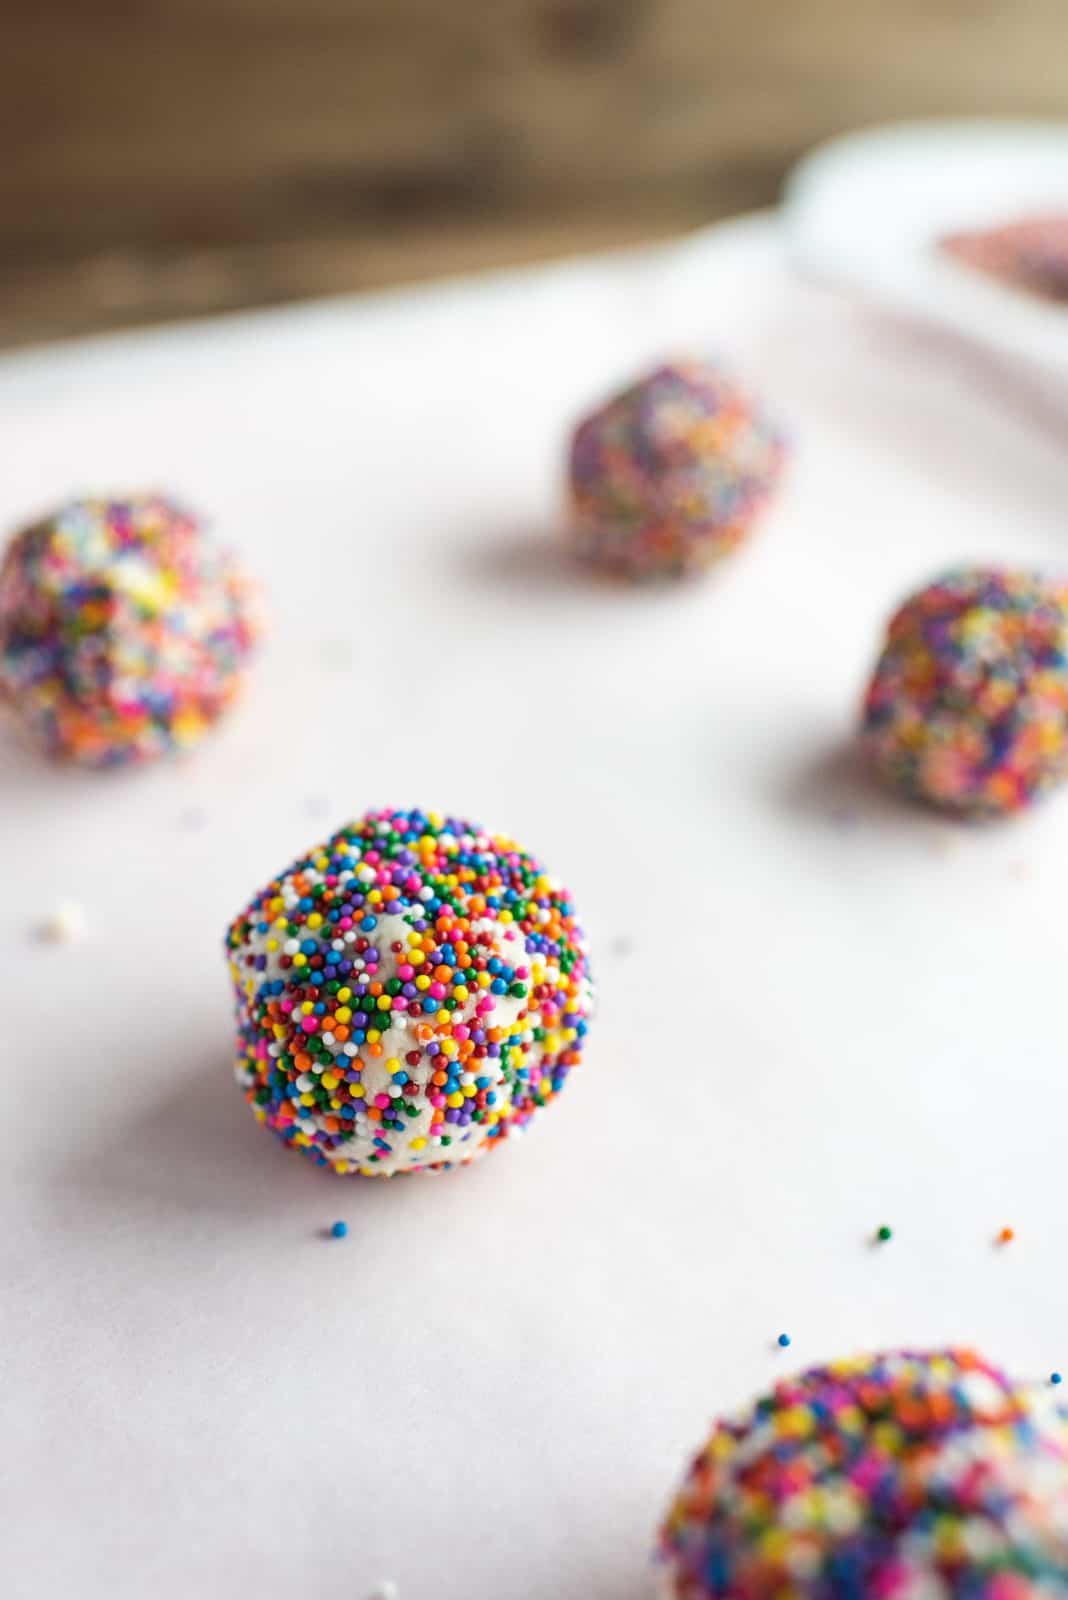 Cookies rolled in nonpareils on parchment paper lined baking sheet.